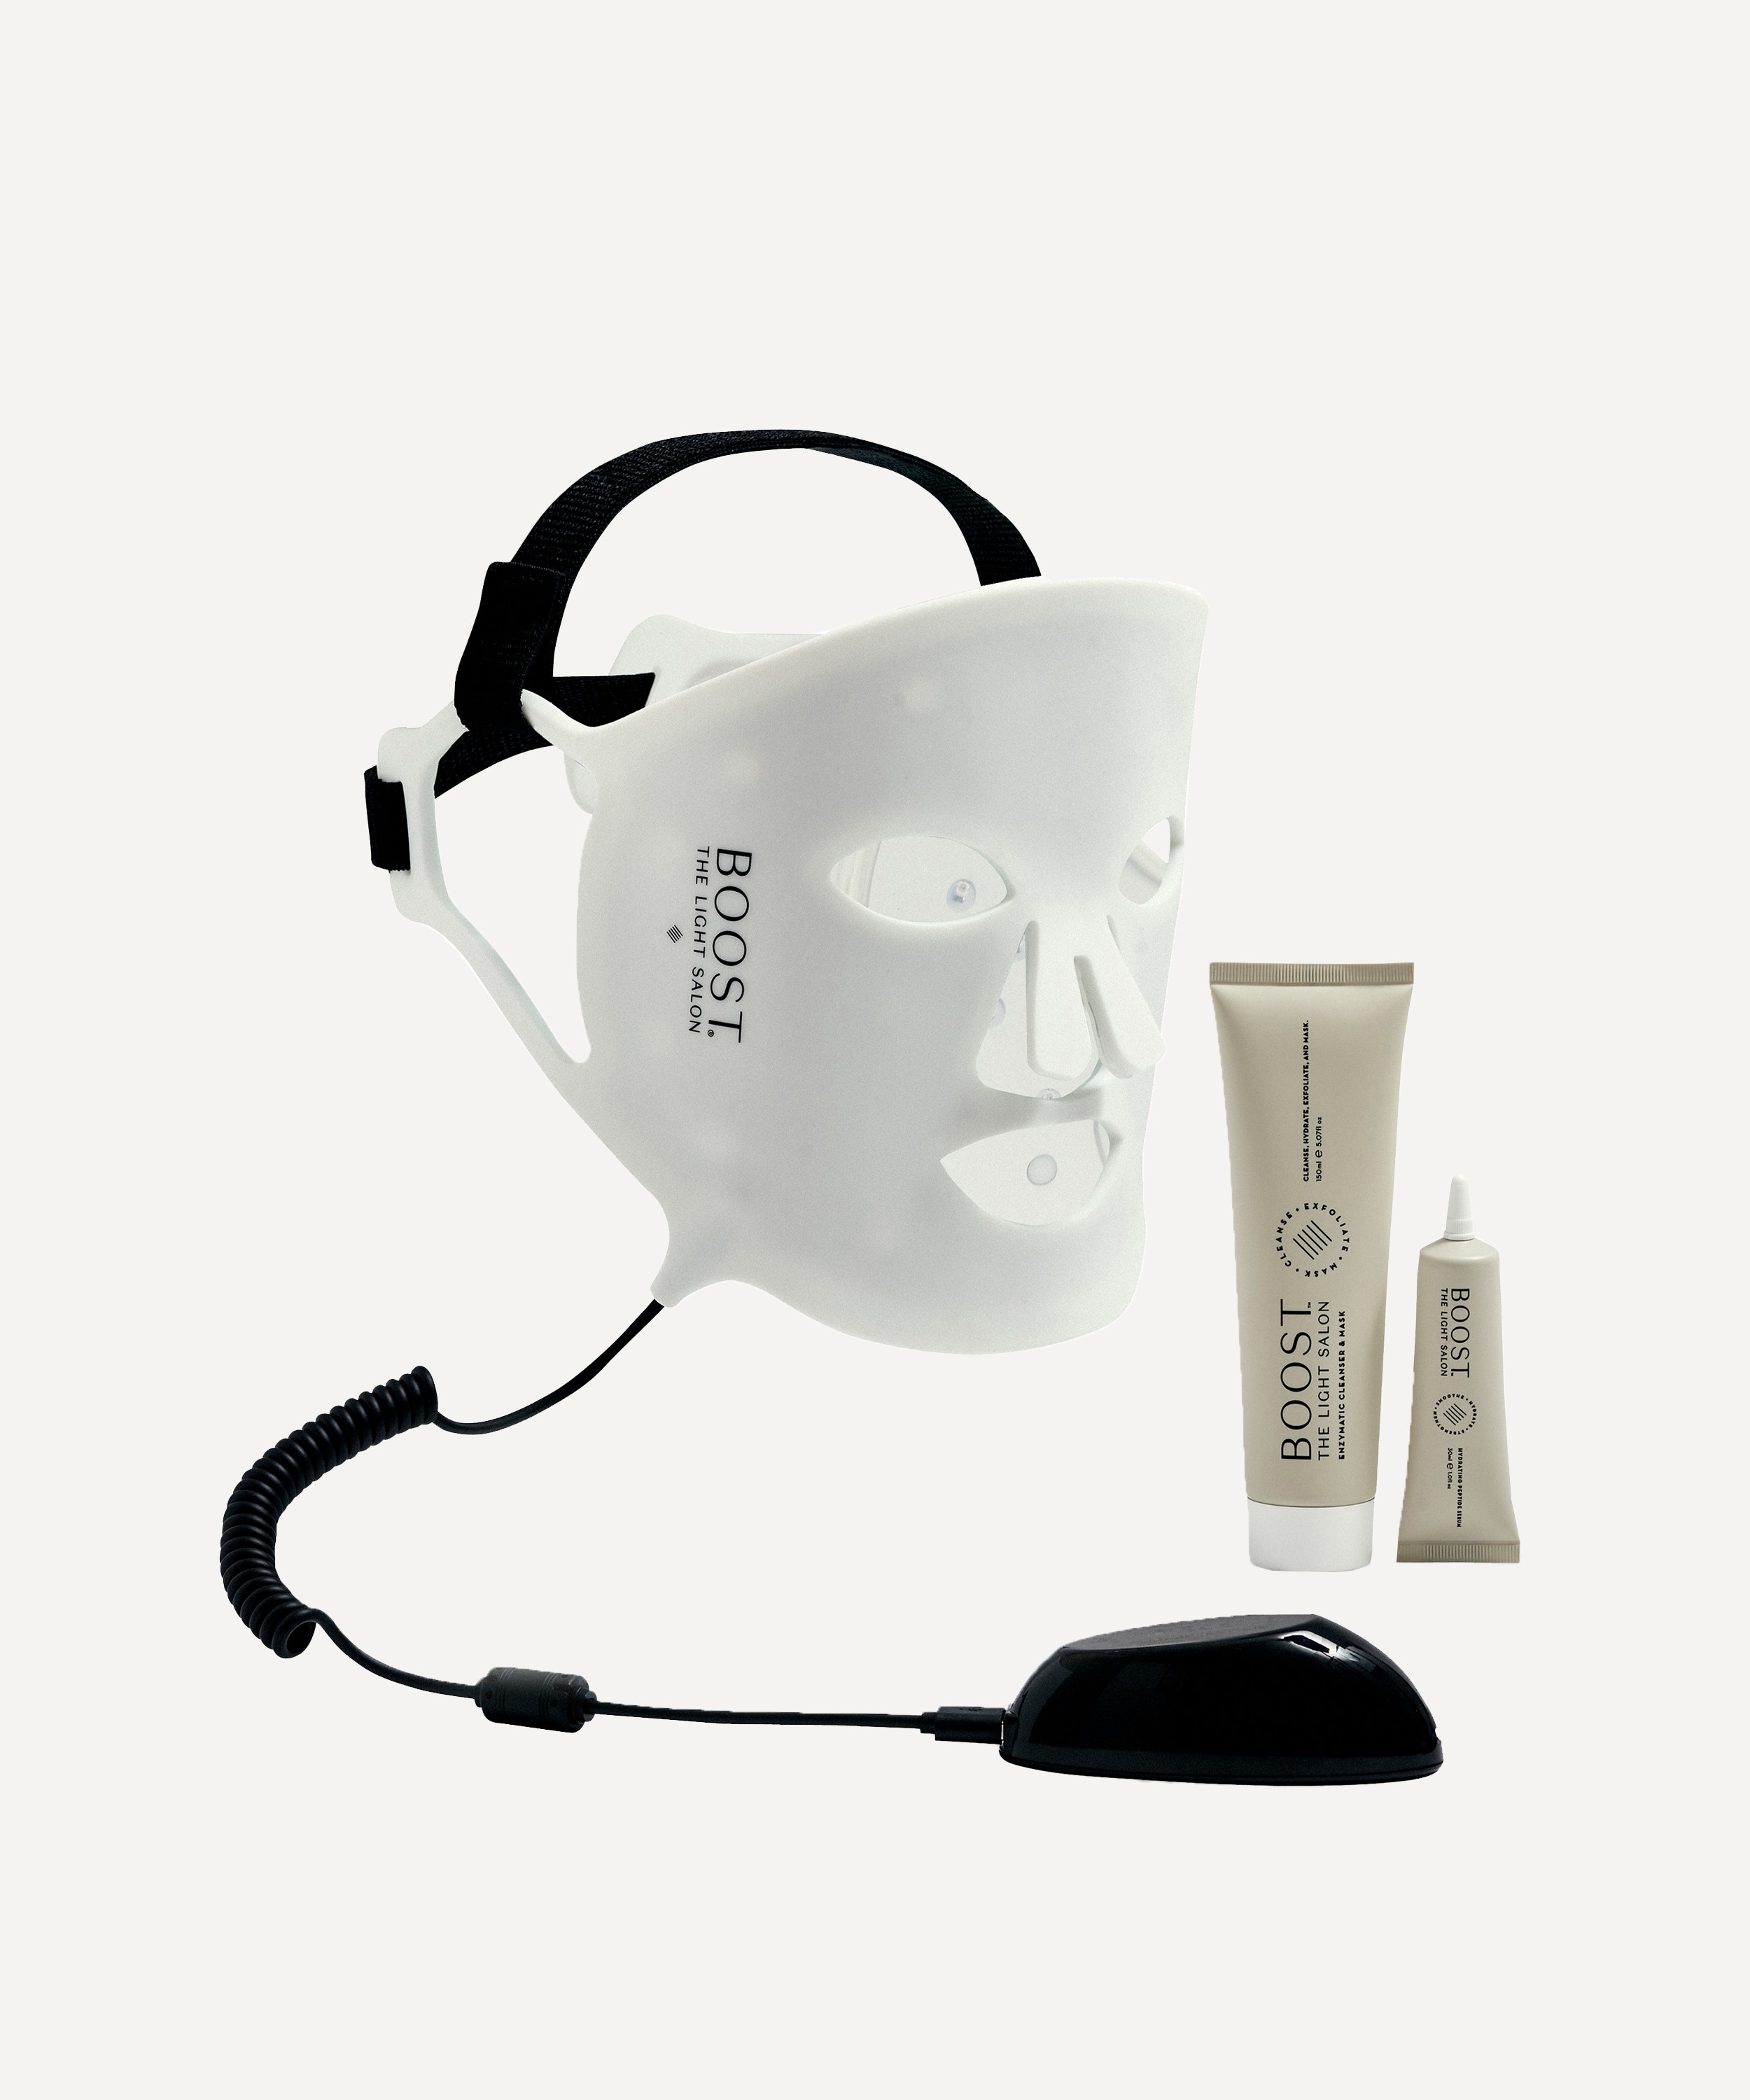 The Light Salon - Revive and Repeat LED Facial Set